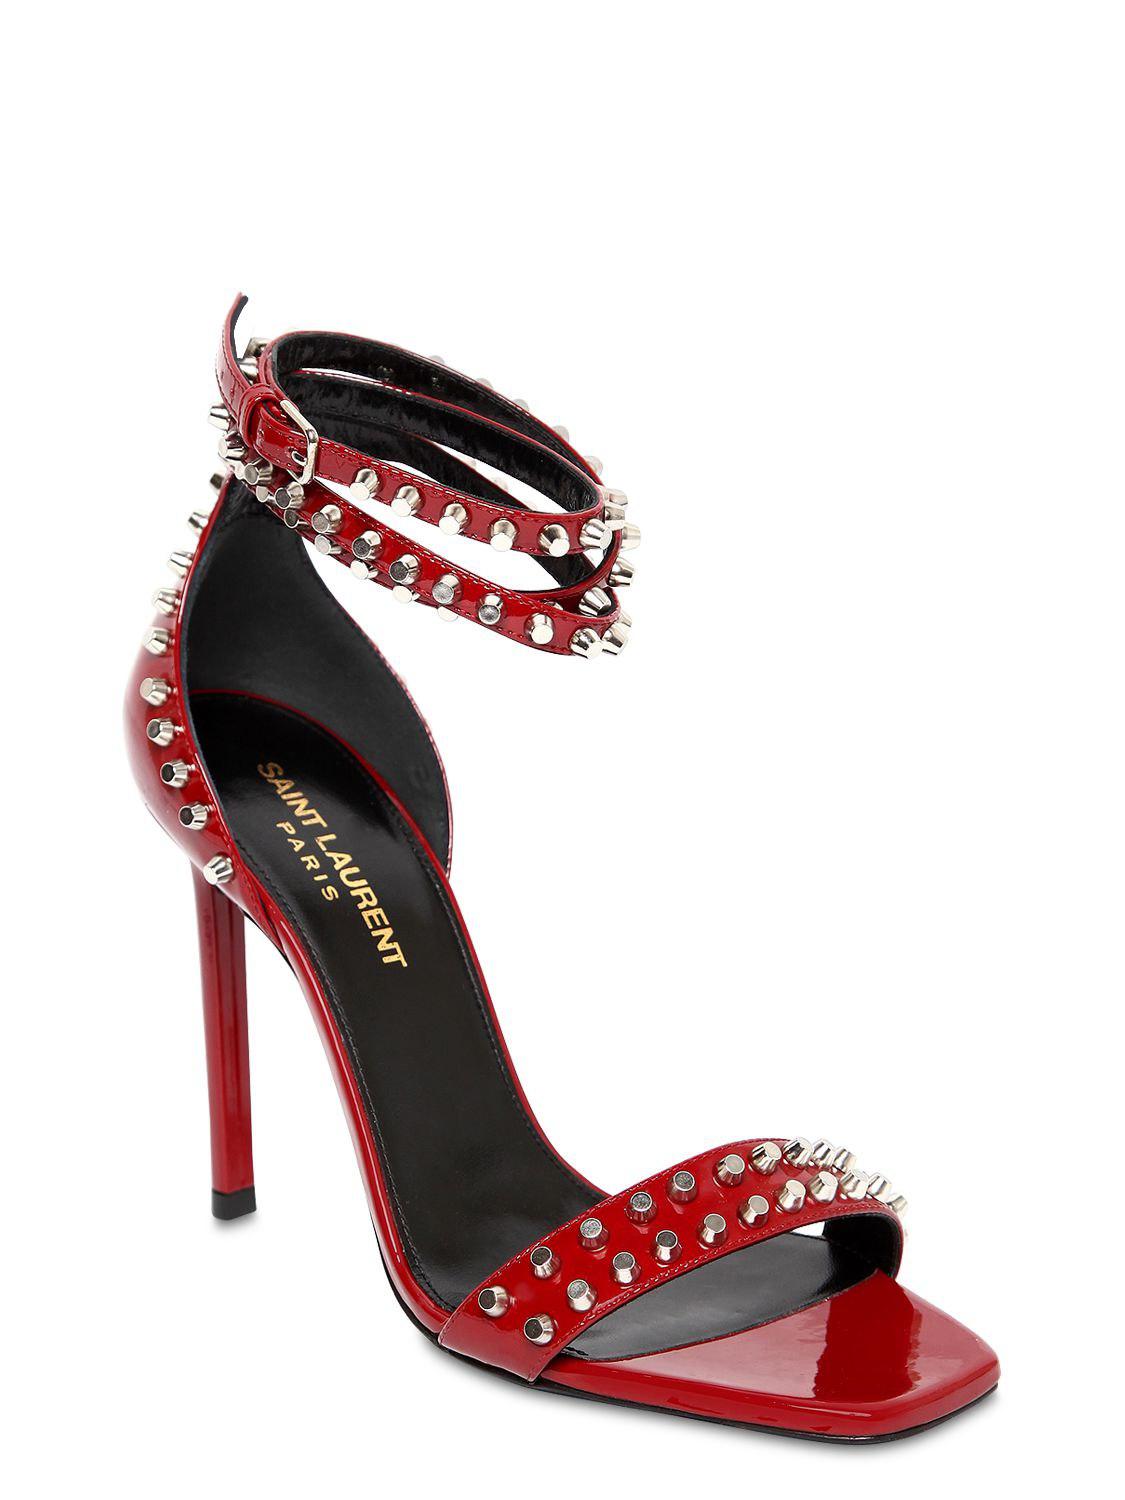 Saint Laurent 105mm Amber Studs Patent Leather Sandals in Red | Lyst